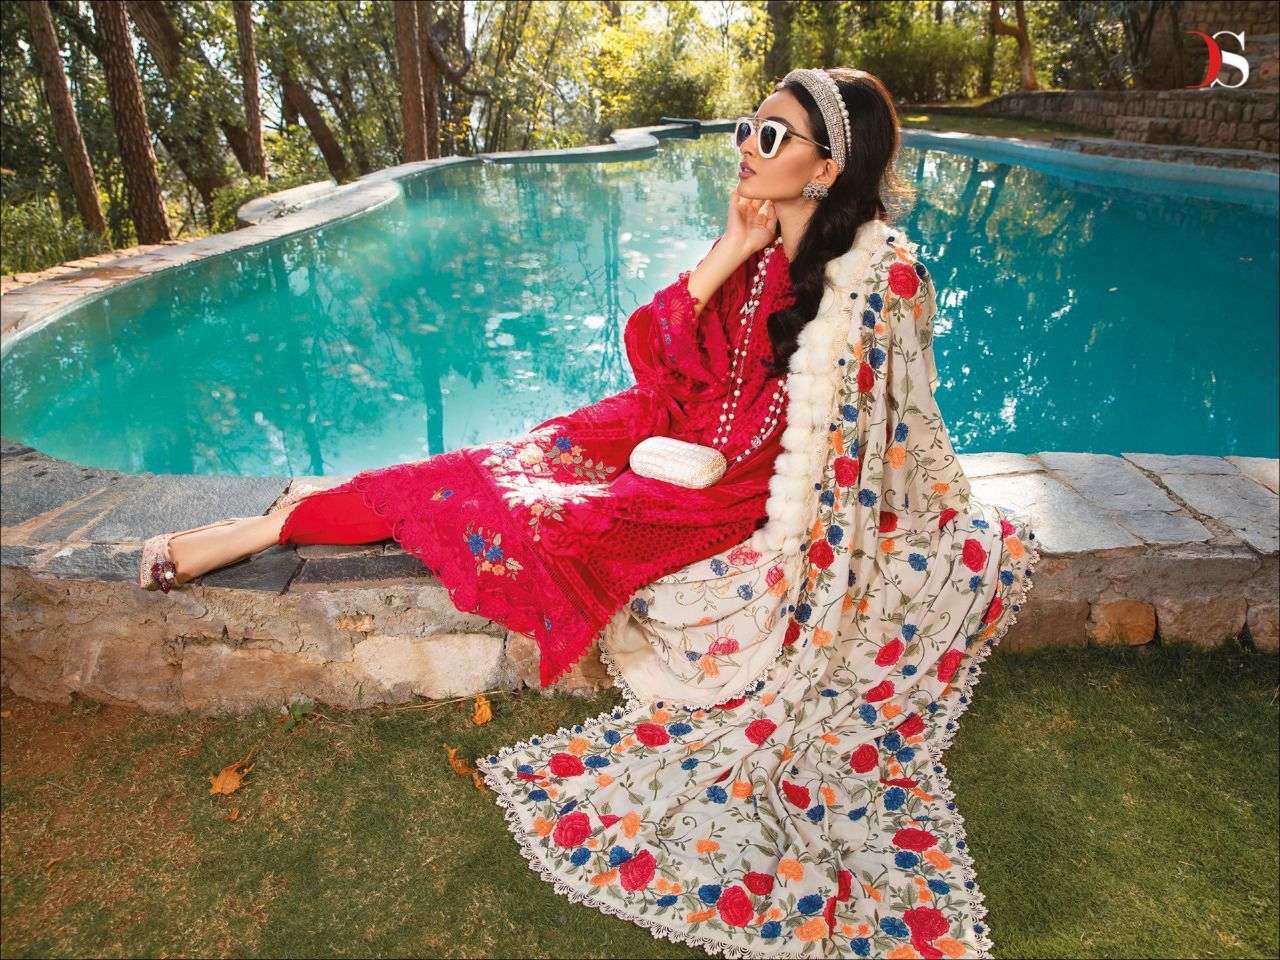 deepsy suits mariab lawn 22-4 1939-1945 series pure cotton embroidered salwar kameez surat